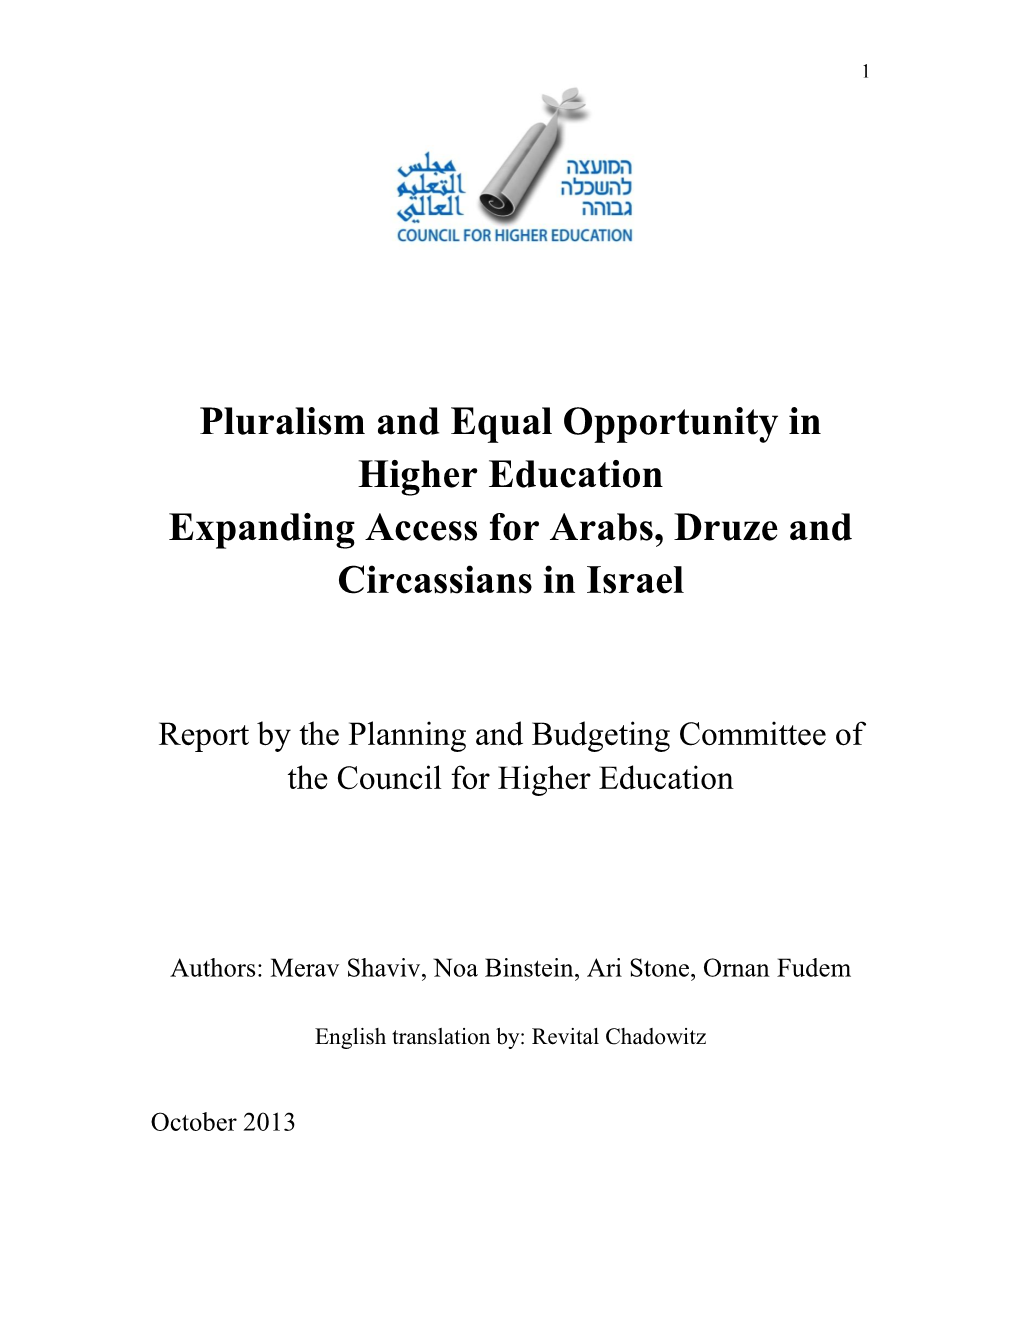 Pluralism and Equal Opportunities in Higher Education